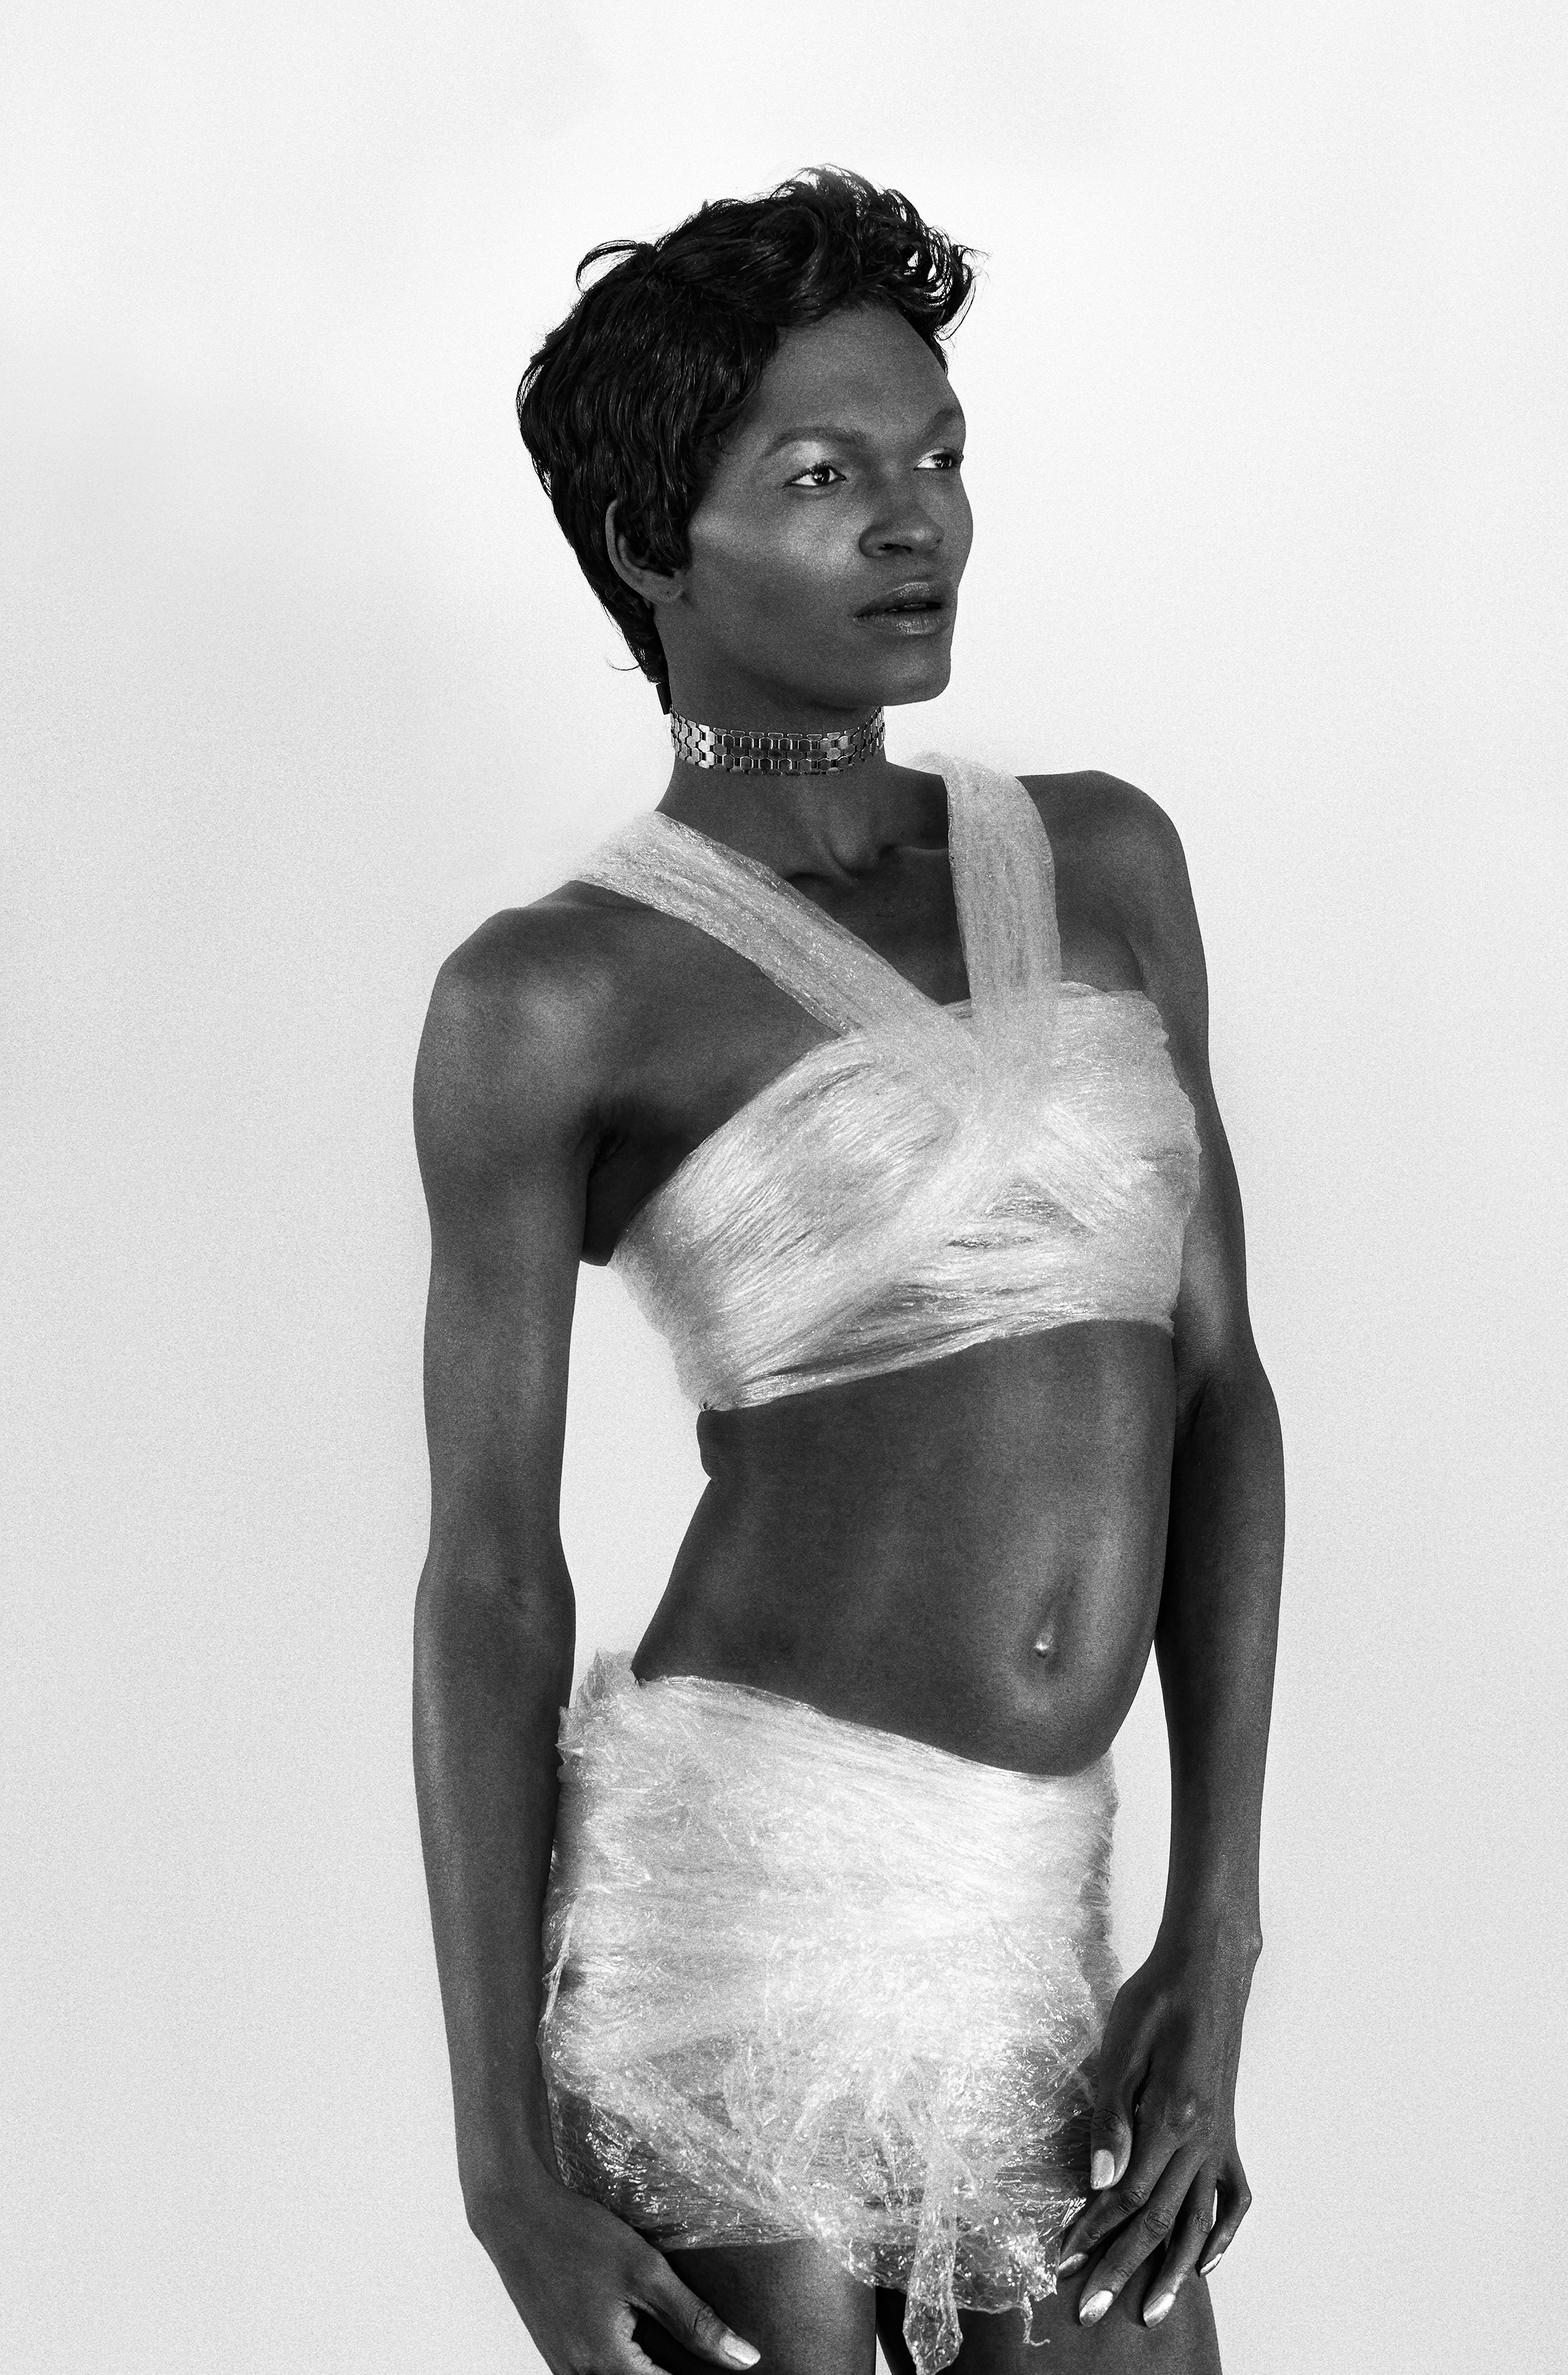 A black and white image of a person with saran wrap around them styled as a top and skirt.